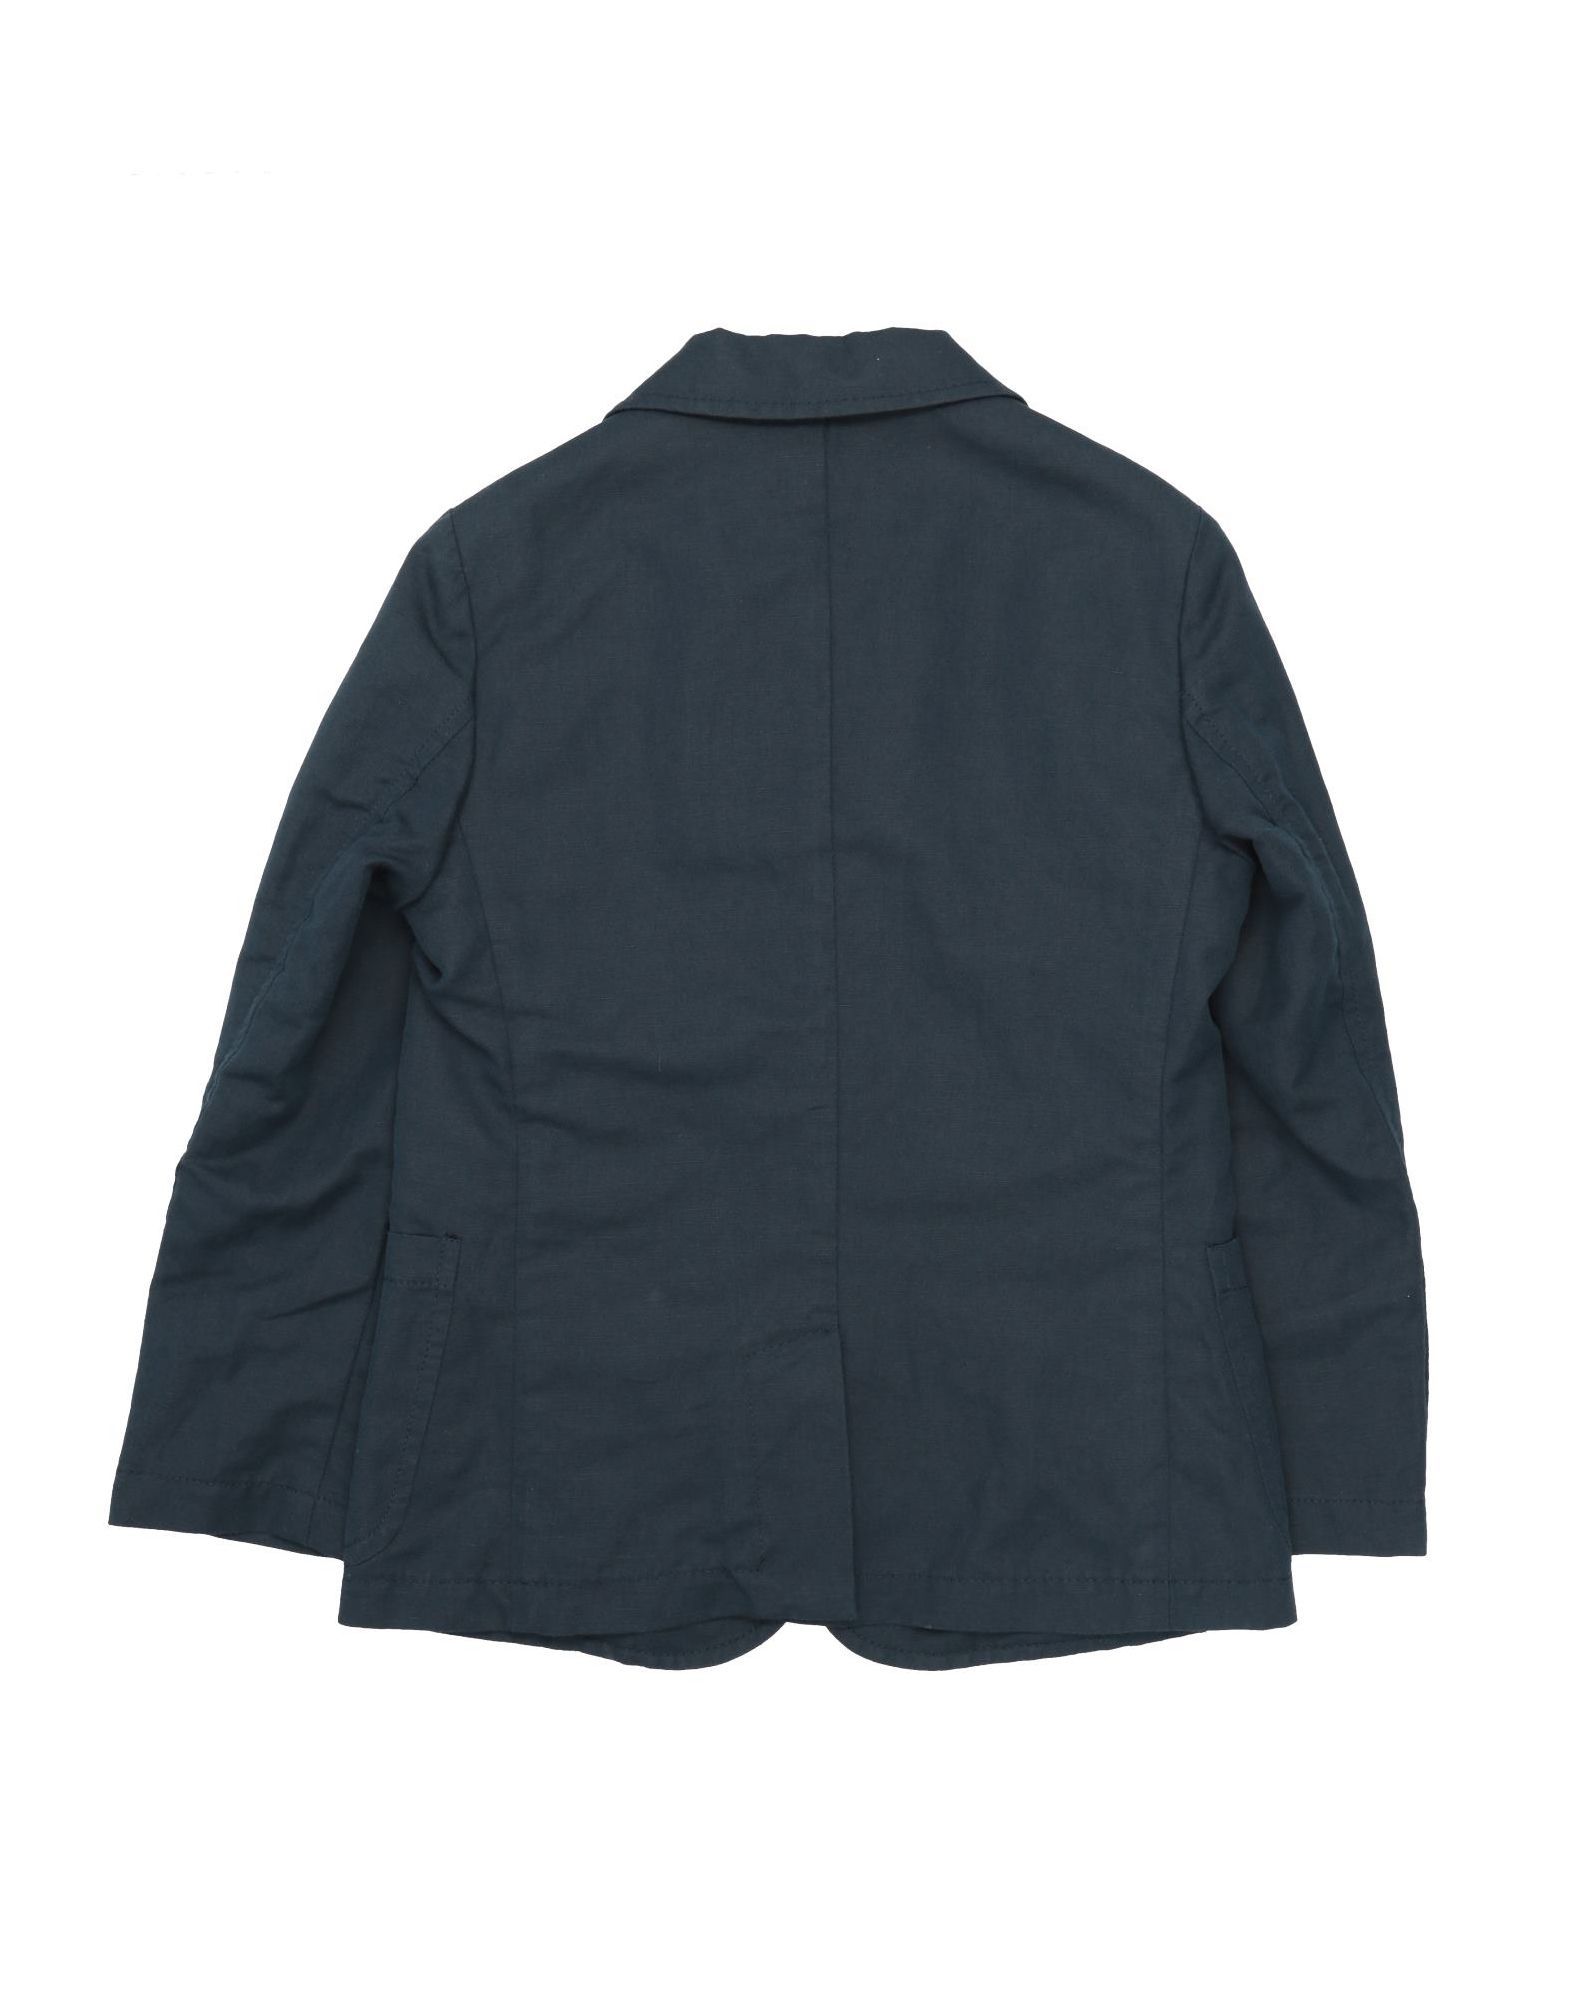 plain weave, no appliqués, solid colour, multipockets, single chest pocket, button closing, lapel collar, single-breasted , long sleeves, semi-lined, do not wash, dry cleanable, iron at 110° c max, do not bleach, stretch